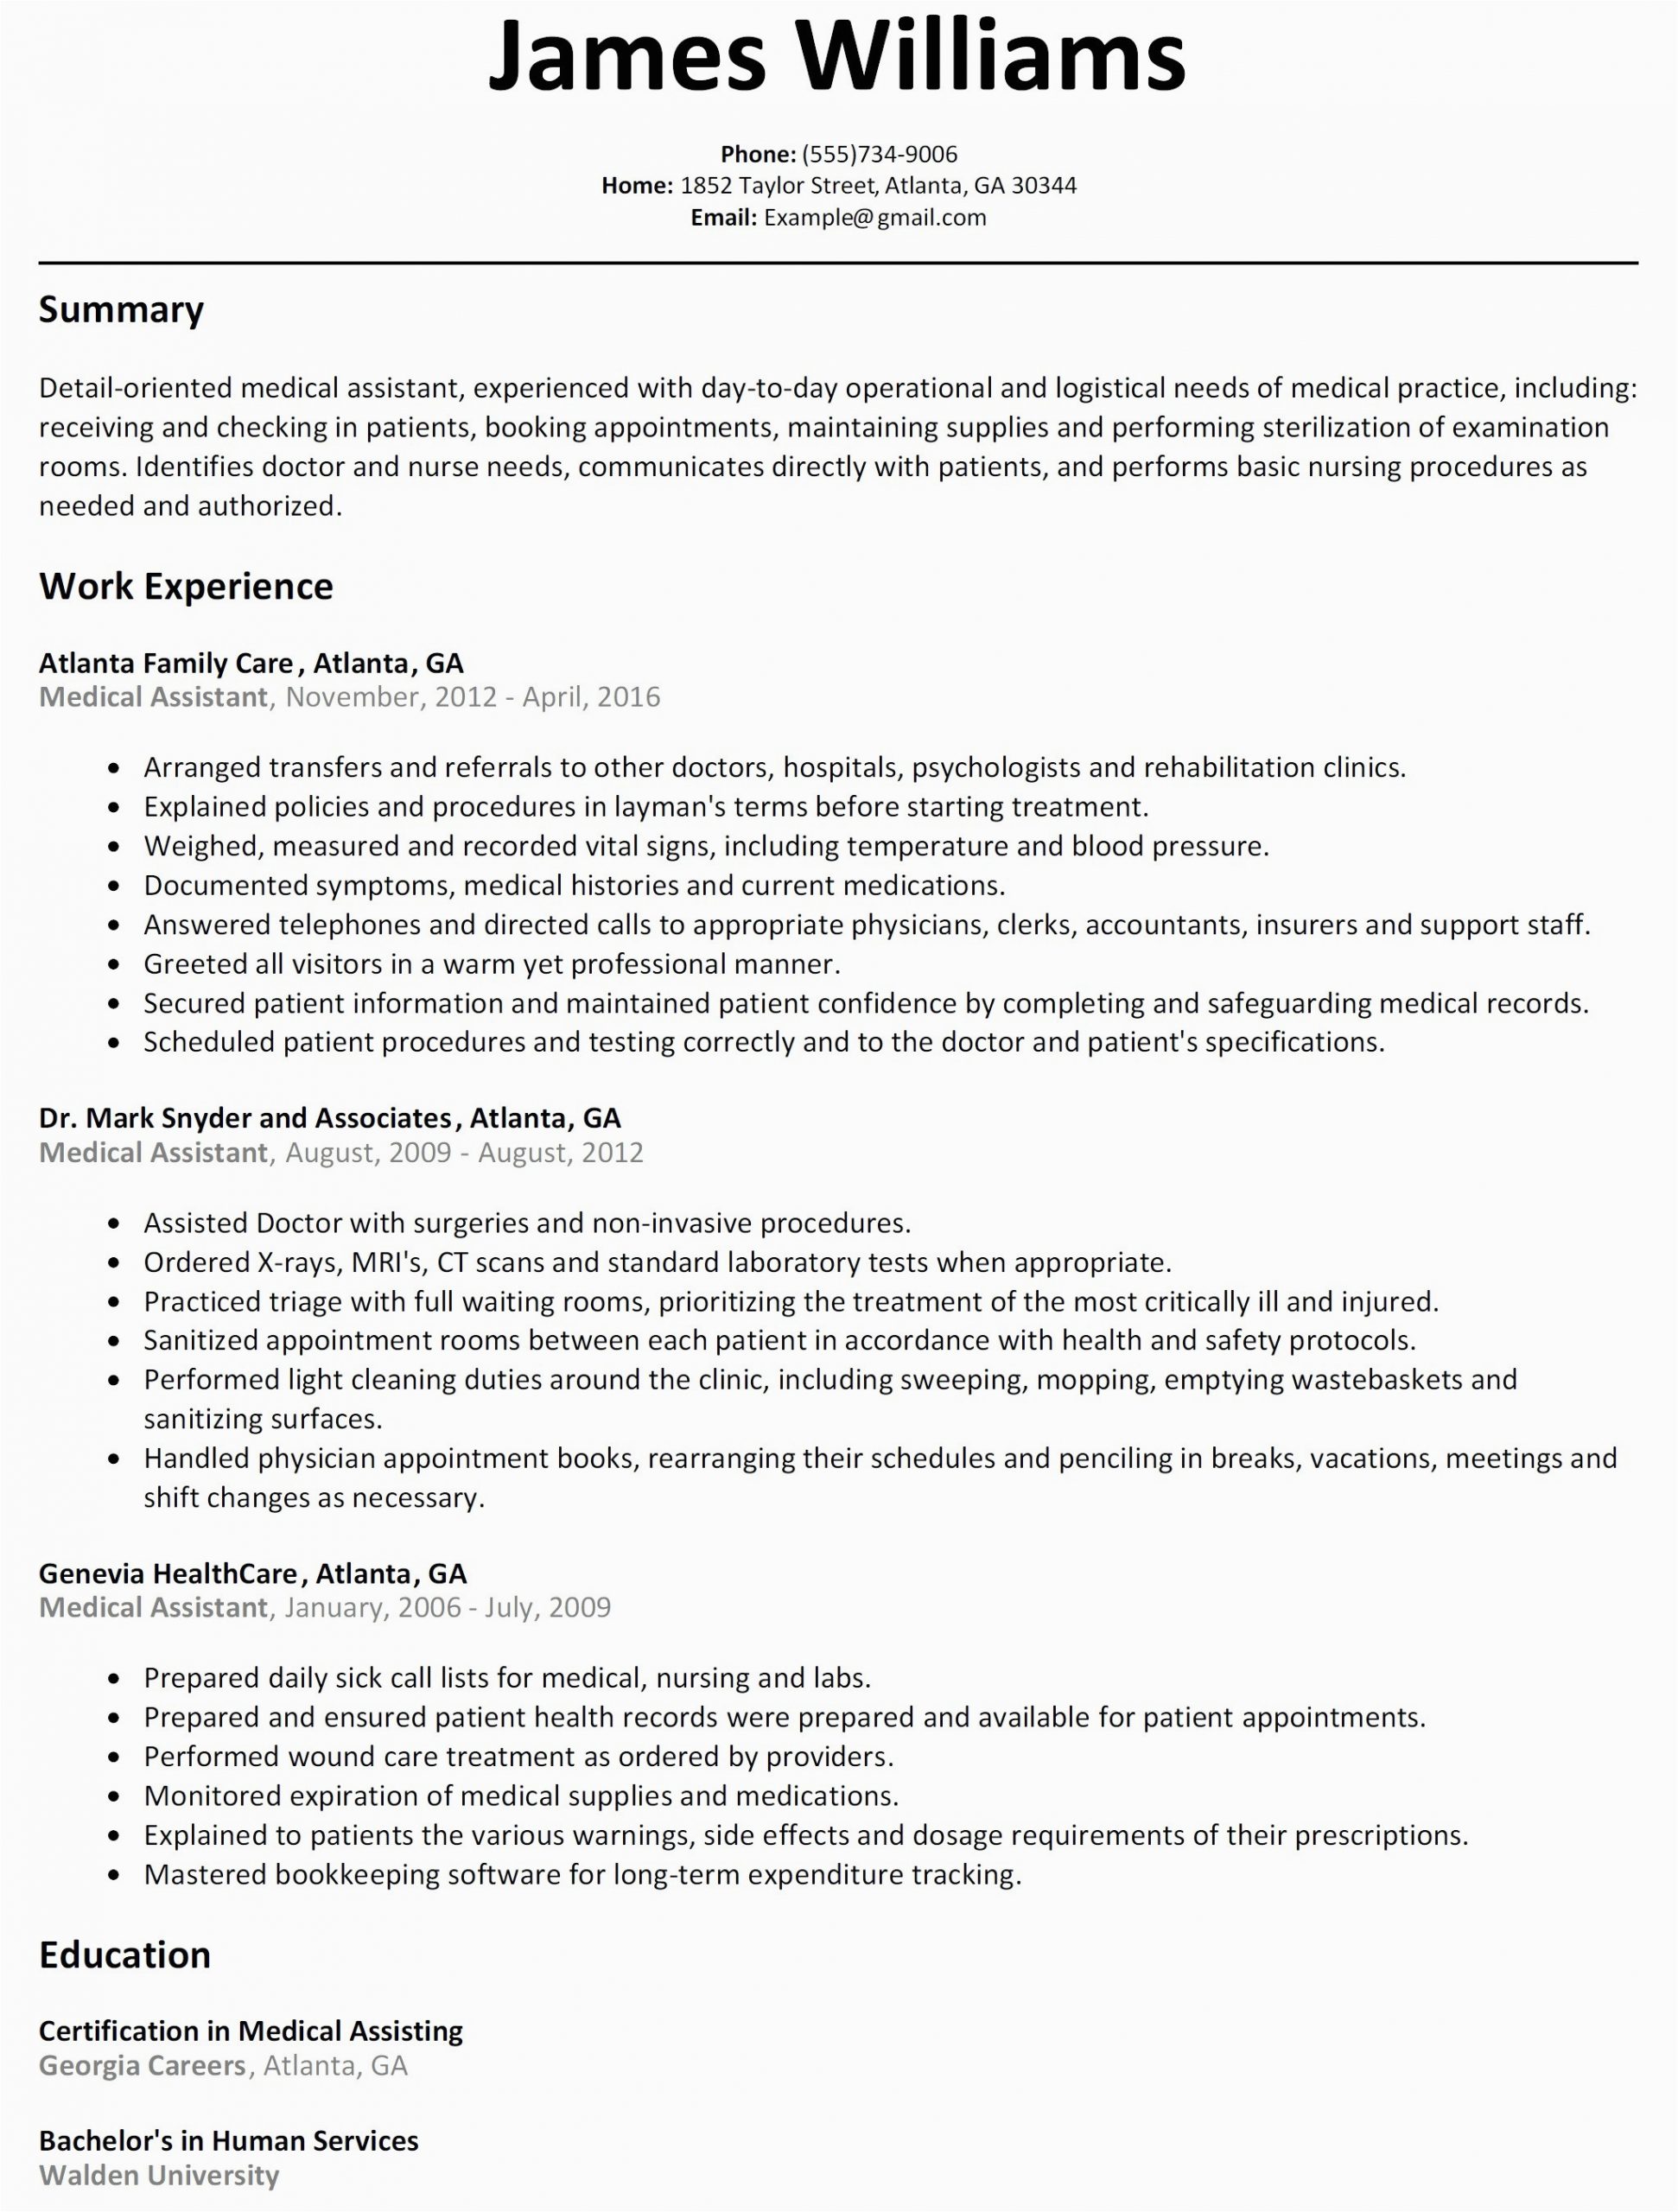 Customer Service Sample Resume for Call Center 9 10 Example Call Center Resume Lascazuelasphilly